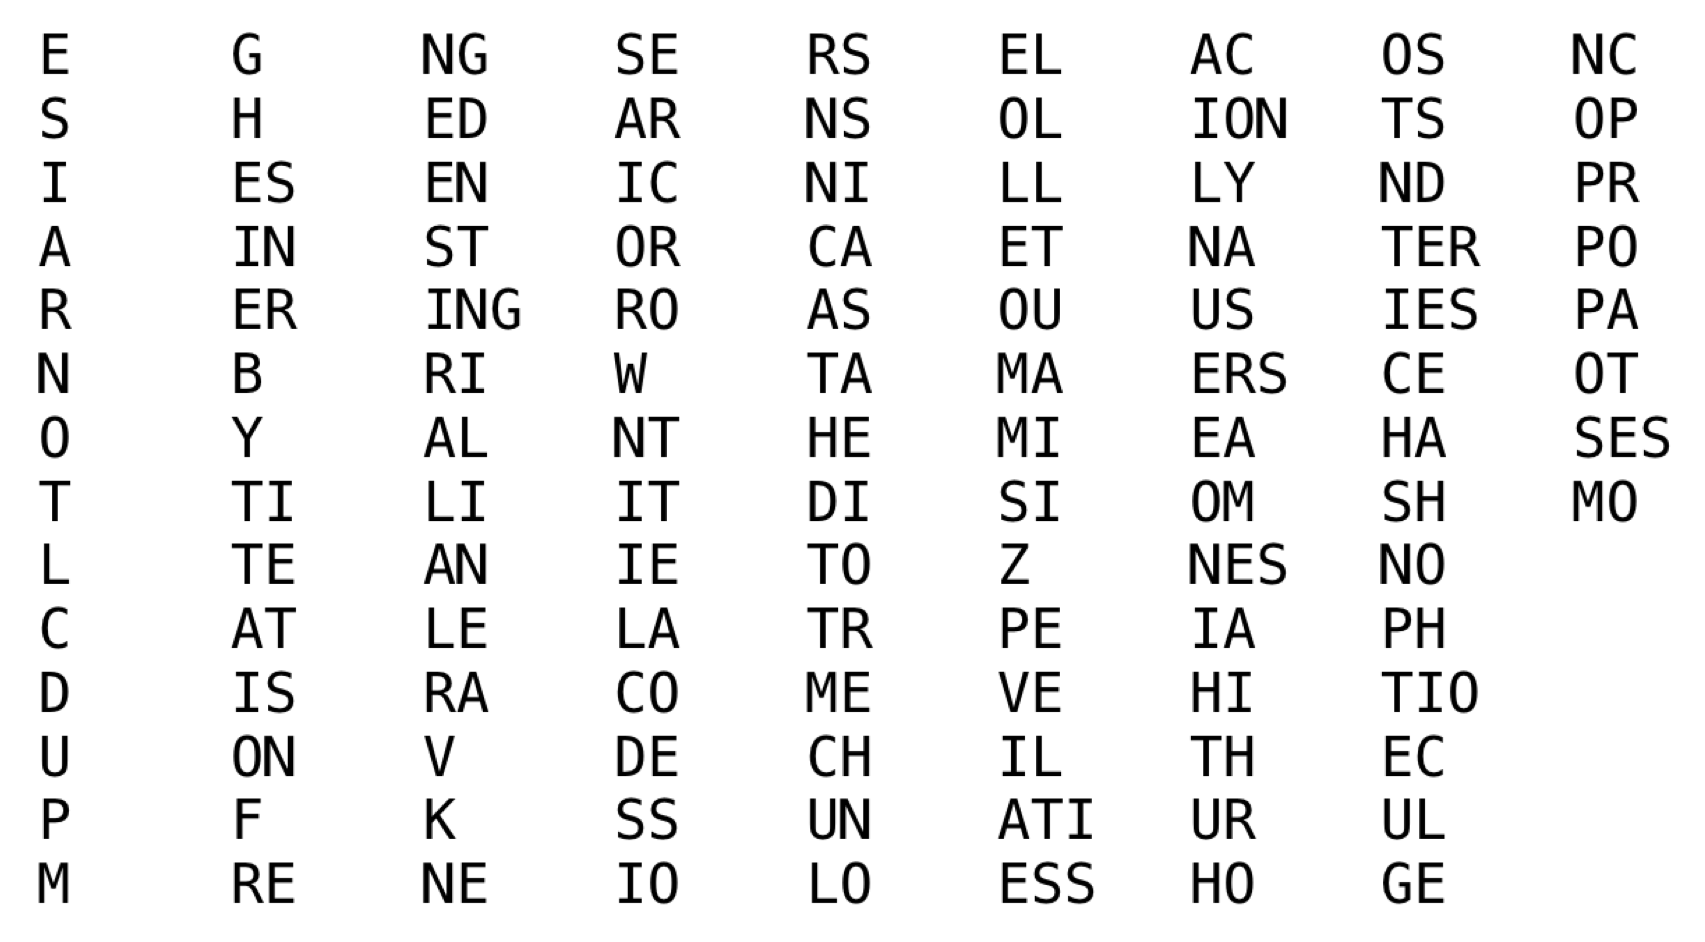 Grid of letter sequences